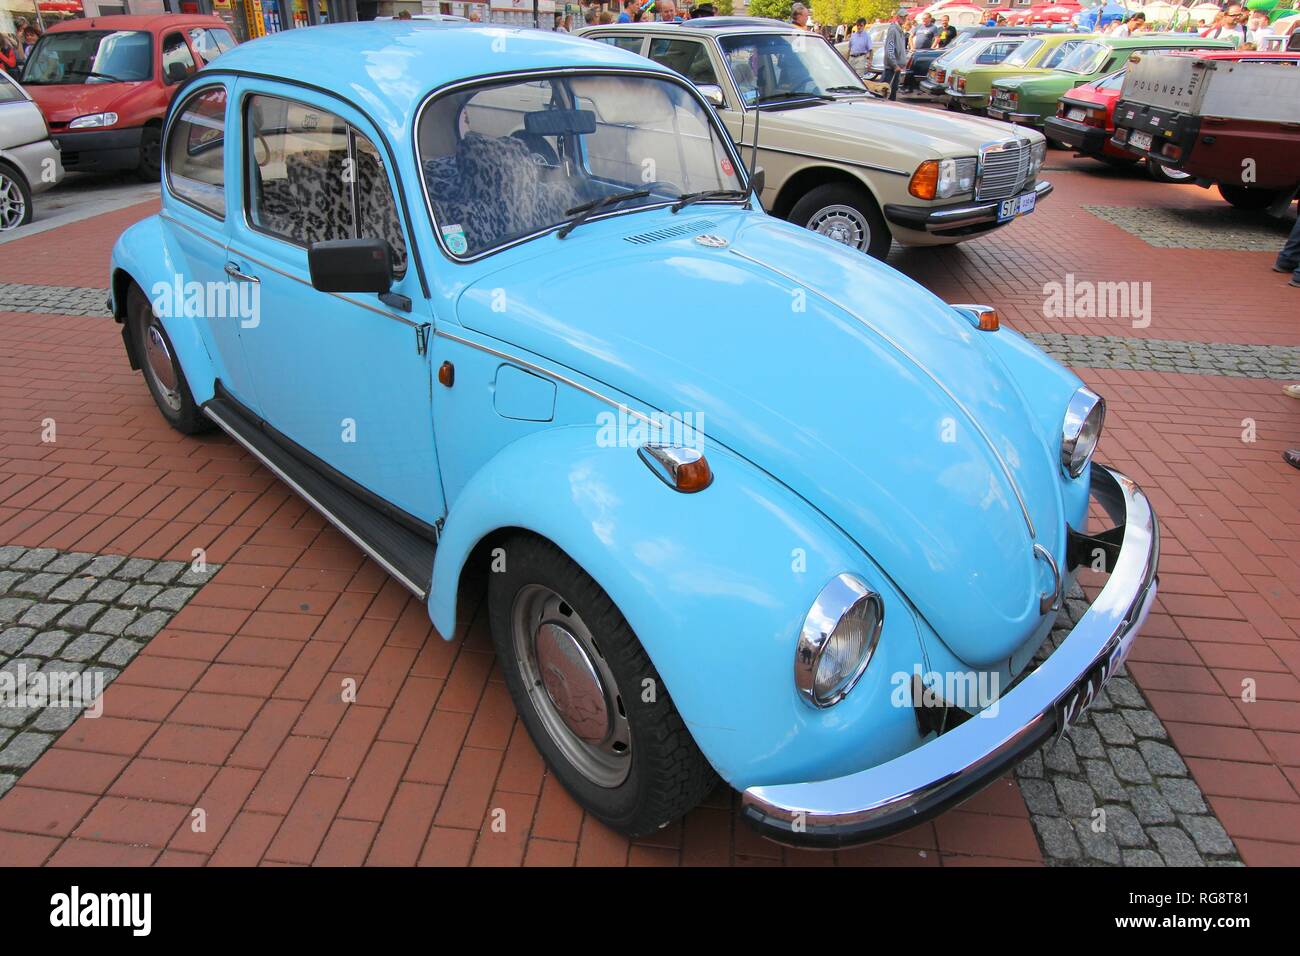 BYTOM, POLAND - SEPTEMBER 12, 2015: Volkswagen Beetle during 12th Historic Vehicle Rally in Bytom. The annual vehicle parade is one of main events of  Stock Photo